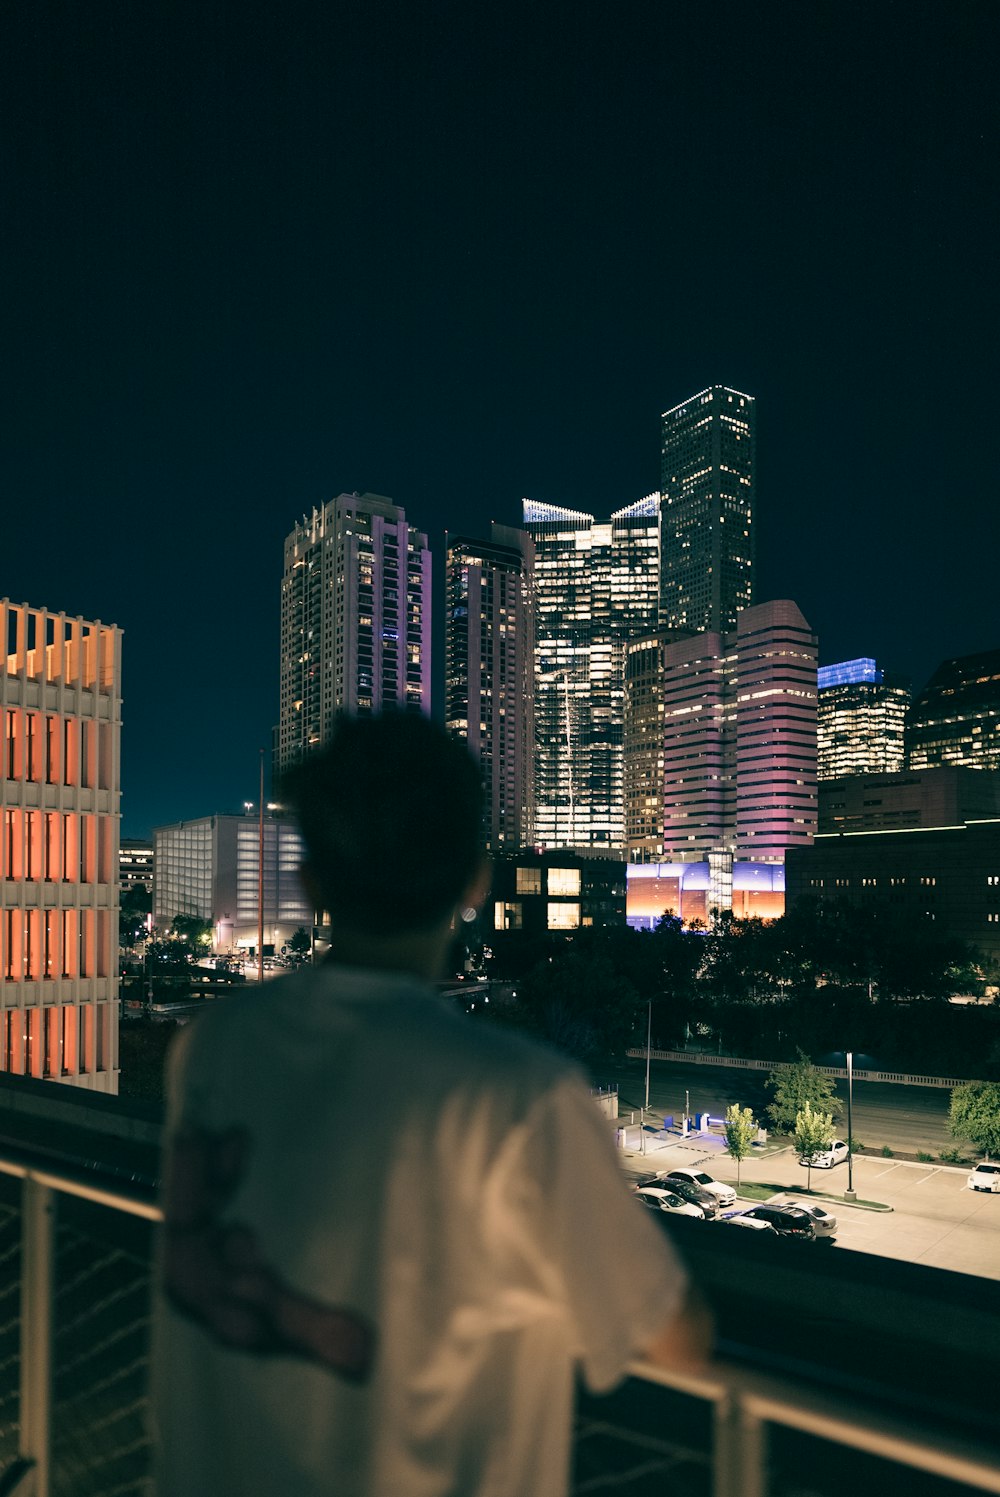 a man standing on a balcony overlooking a city at night